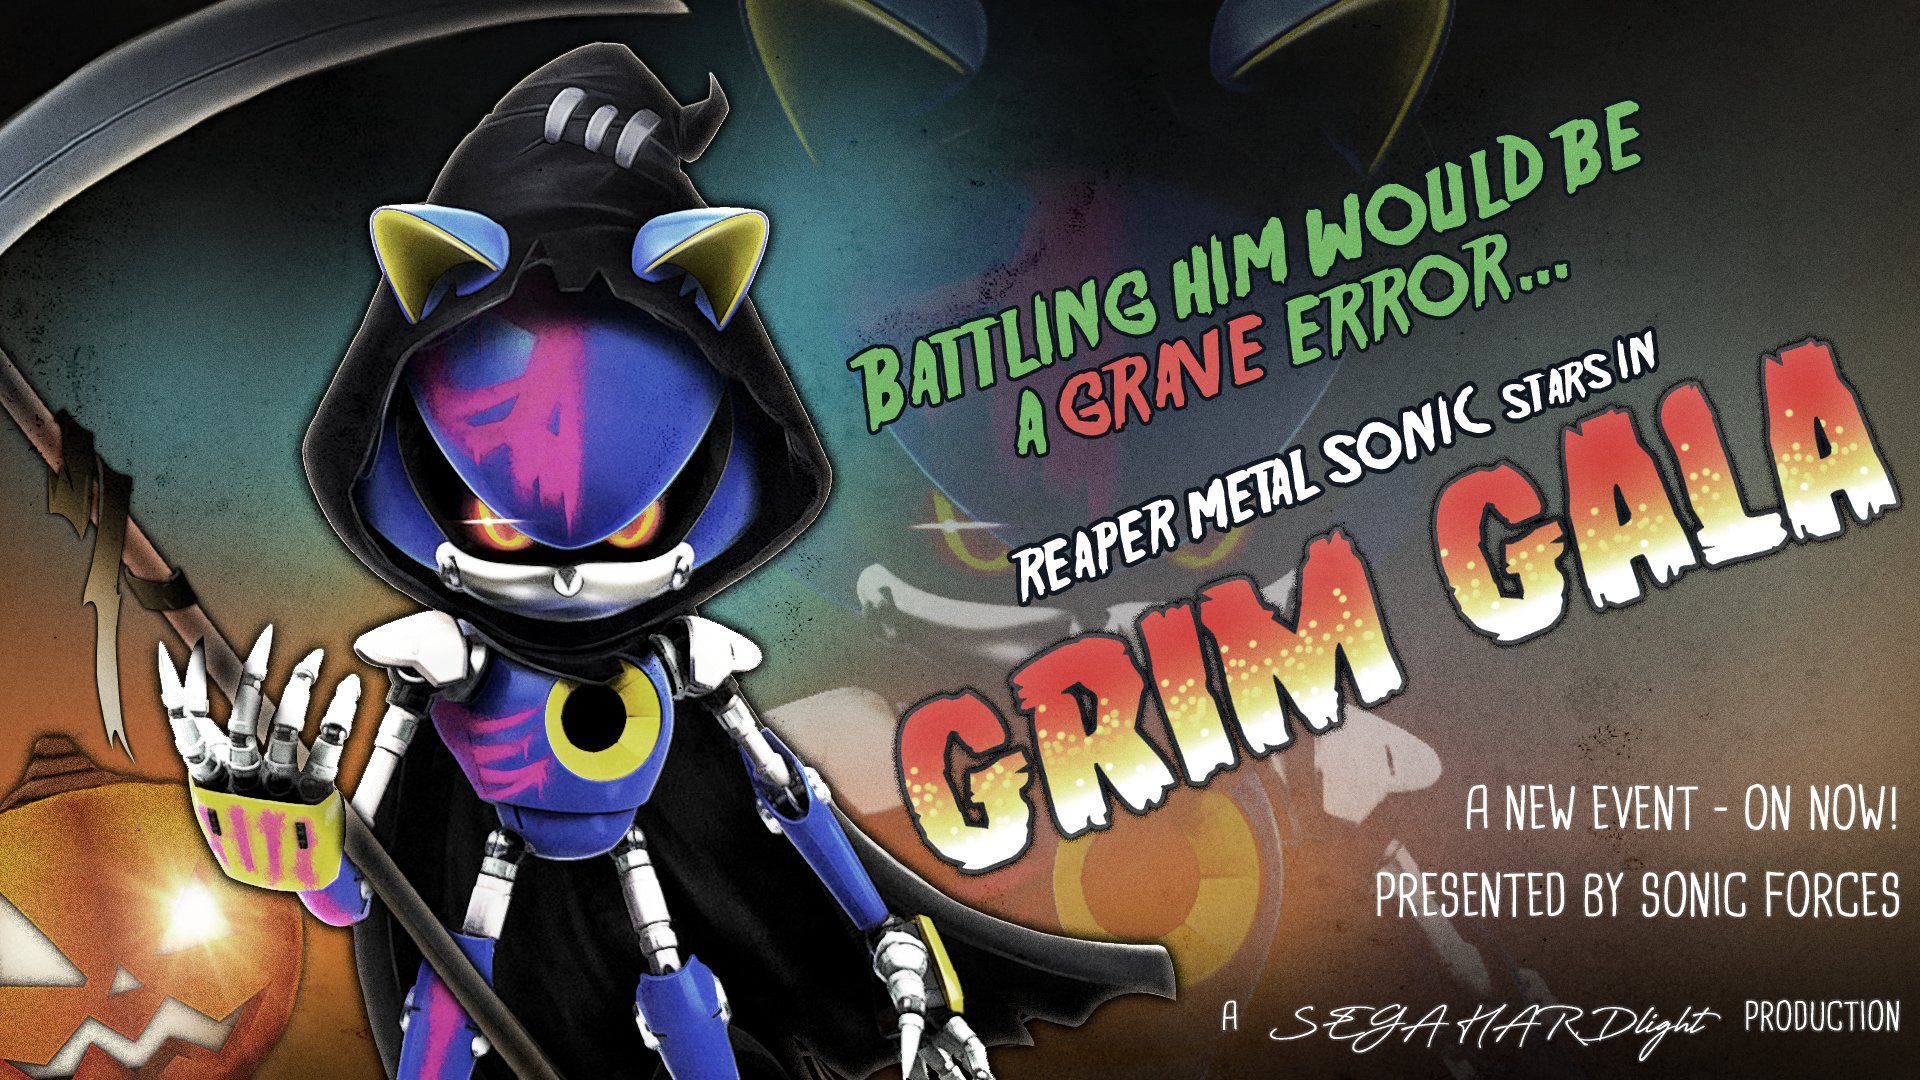 Sonic Forces 'Grim Gala' Begins, Reaper Metal Sonic Up For Grabs Sonic Stadium